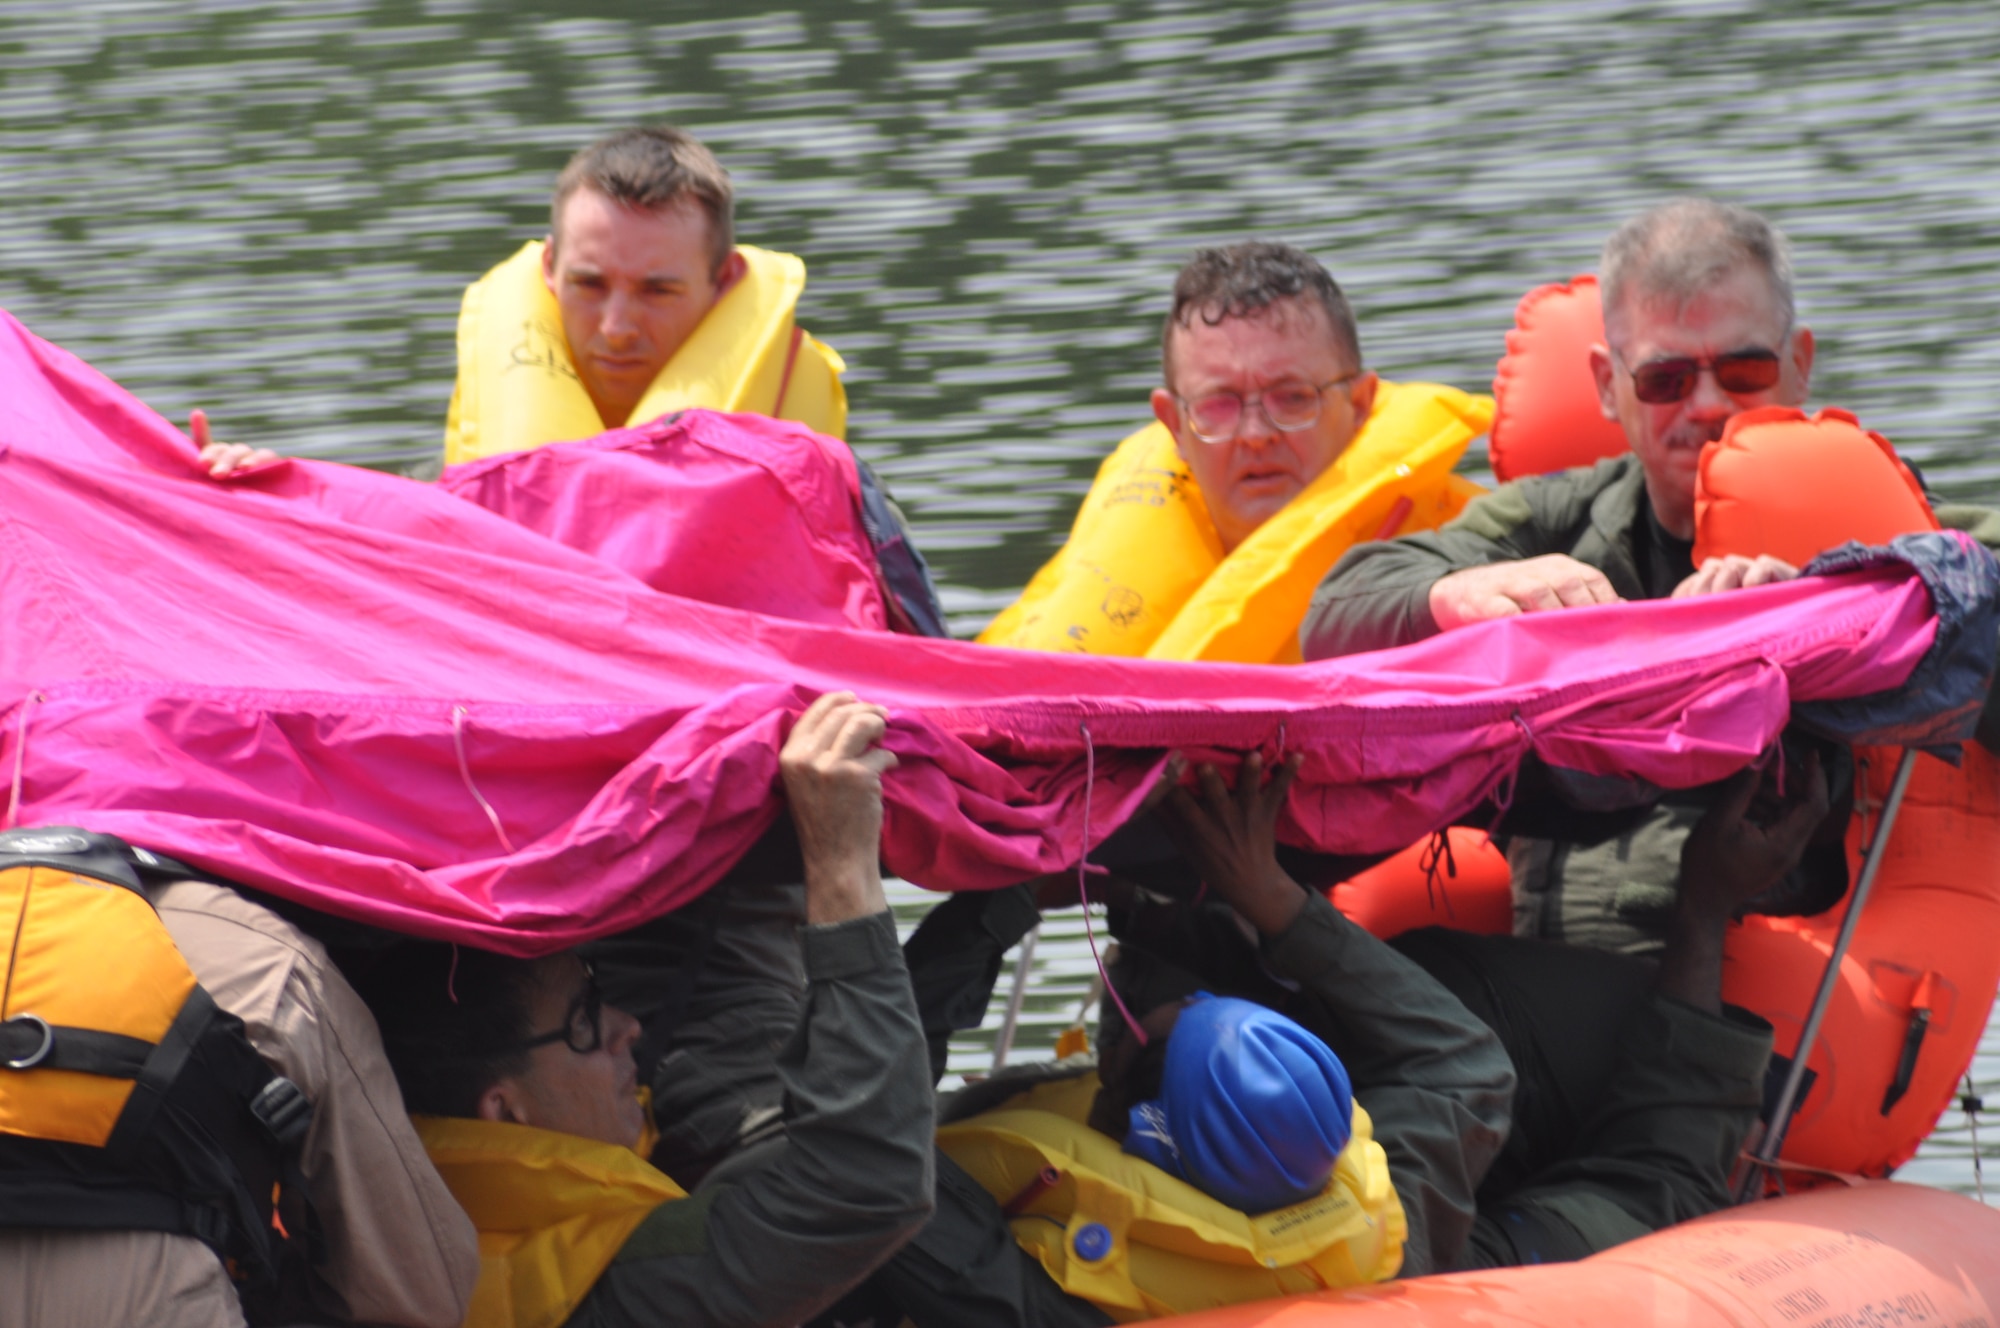 Members of the 908th Airlift Wing set up a 20-man life raft during recent water survival training in the Alabama River.